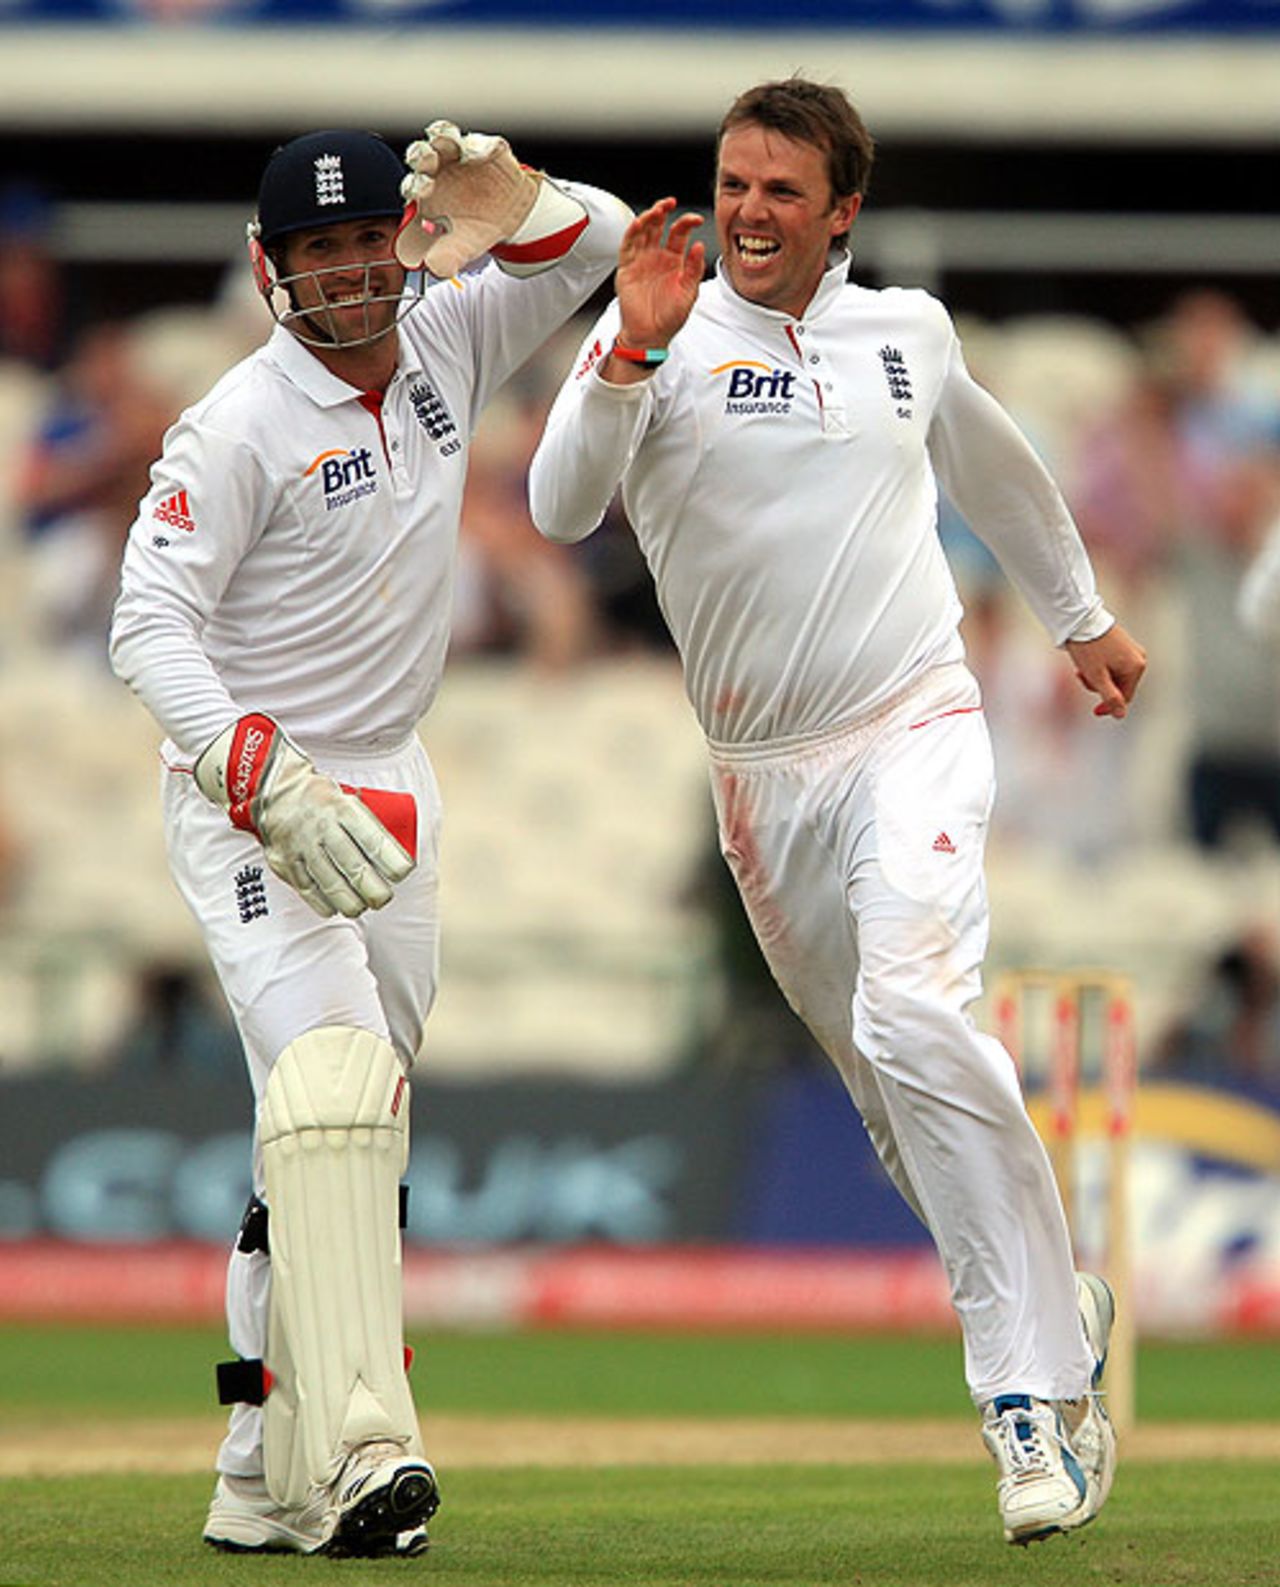 Graeme Swann removed Mushfiqur Rahim to close in on his five-for, England v Bangladesh, 2nd npower Test, Old Trafford, June 5, 2010